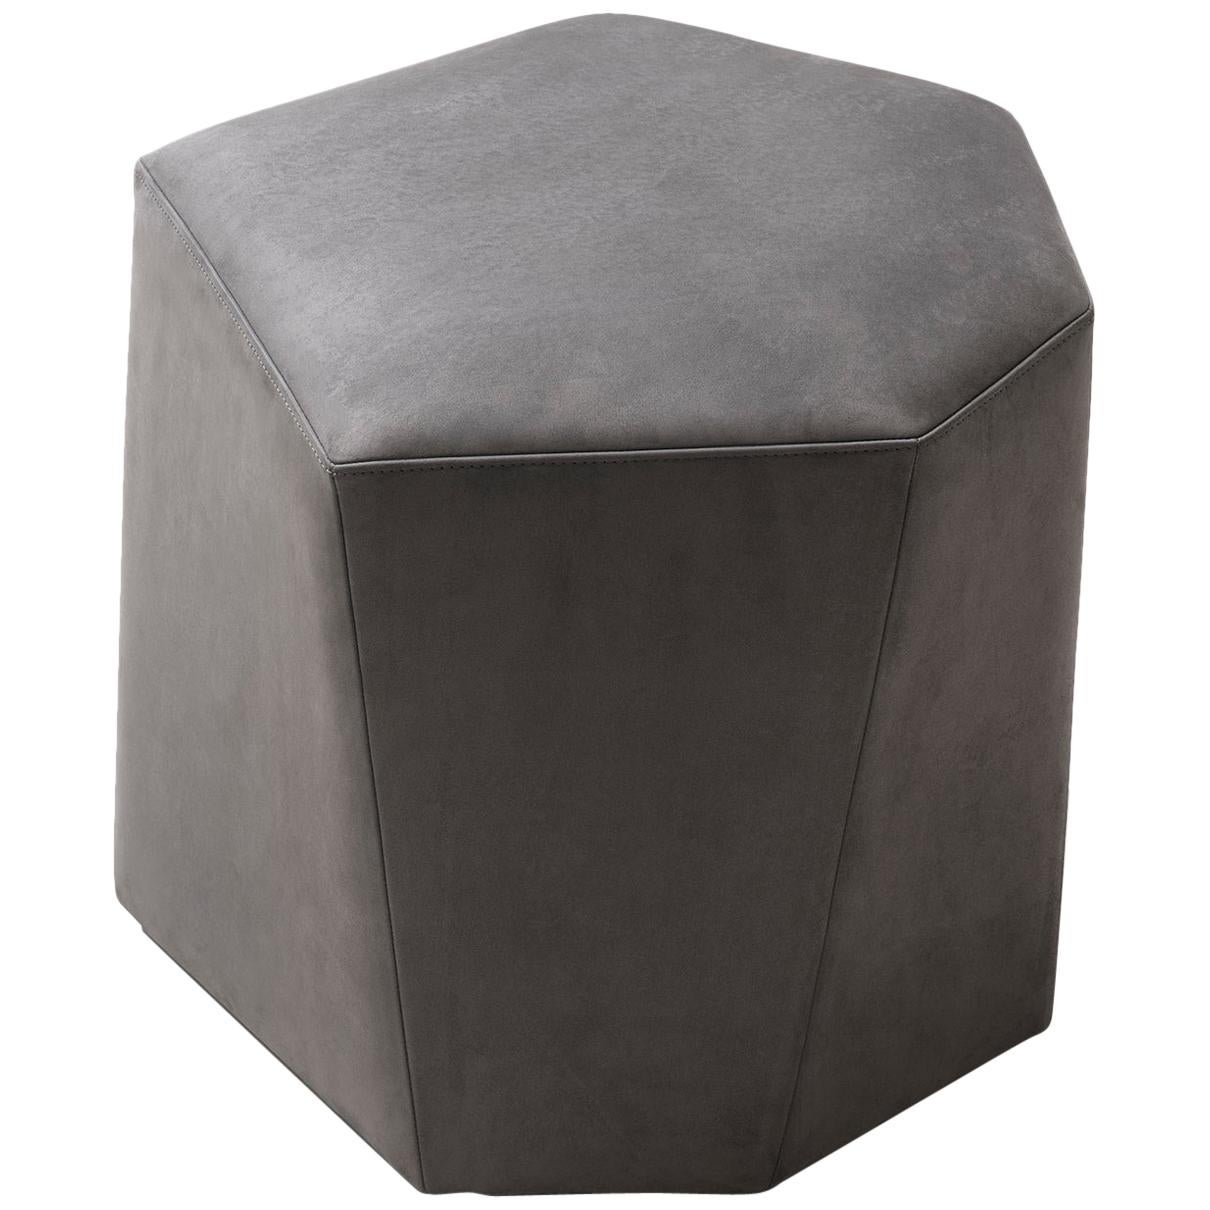 HOLLY HUNT Vrille Ottoman in Elephant Leather